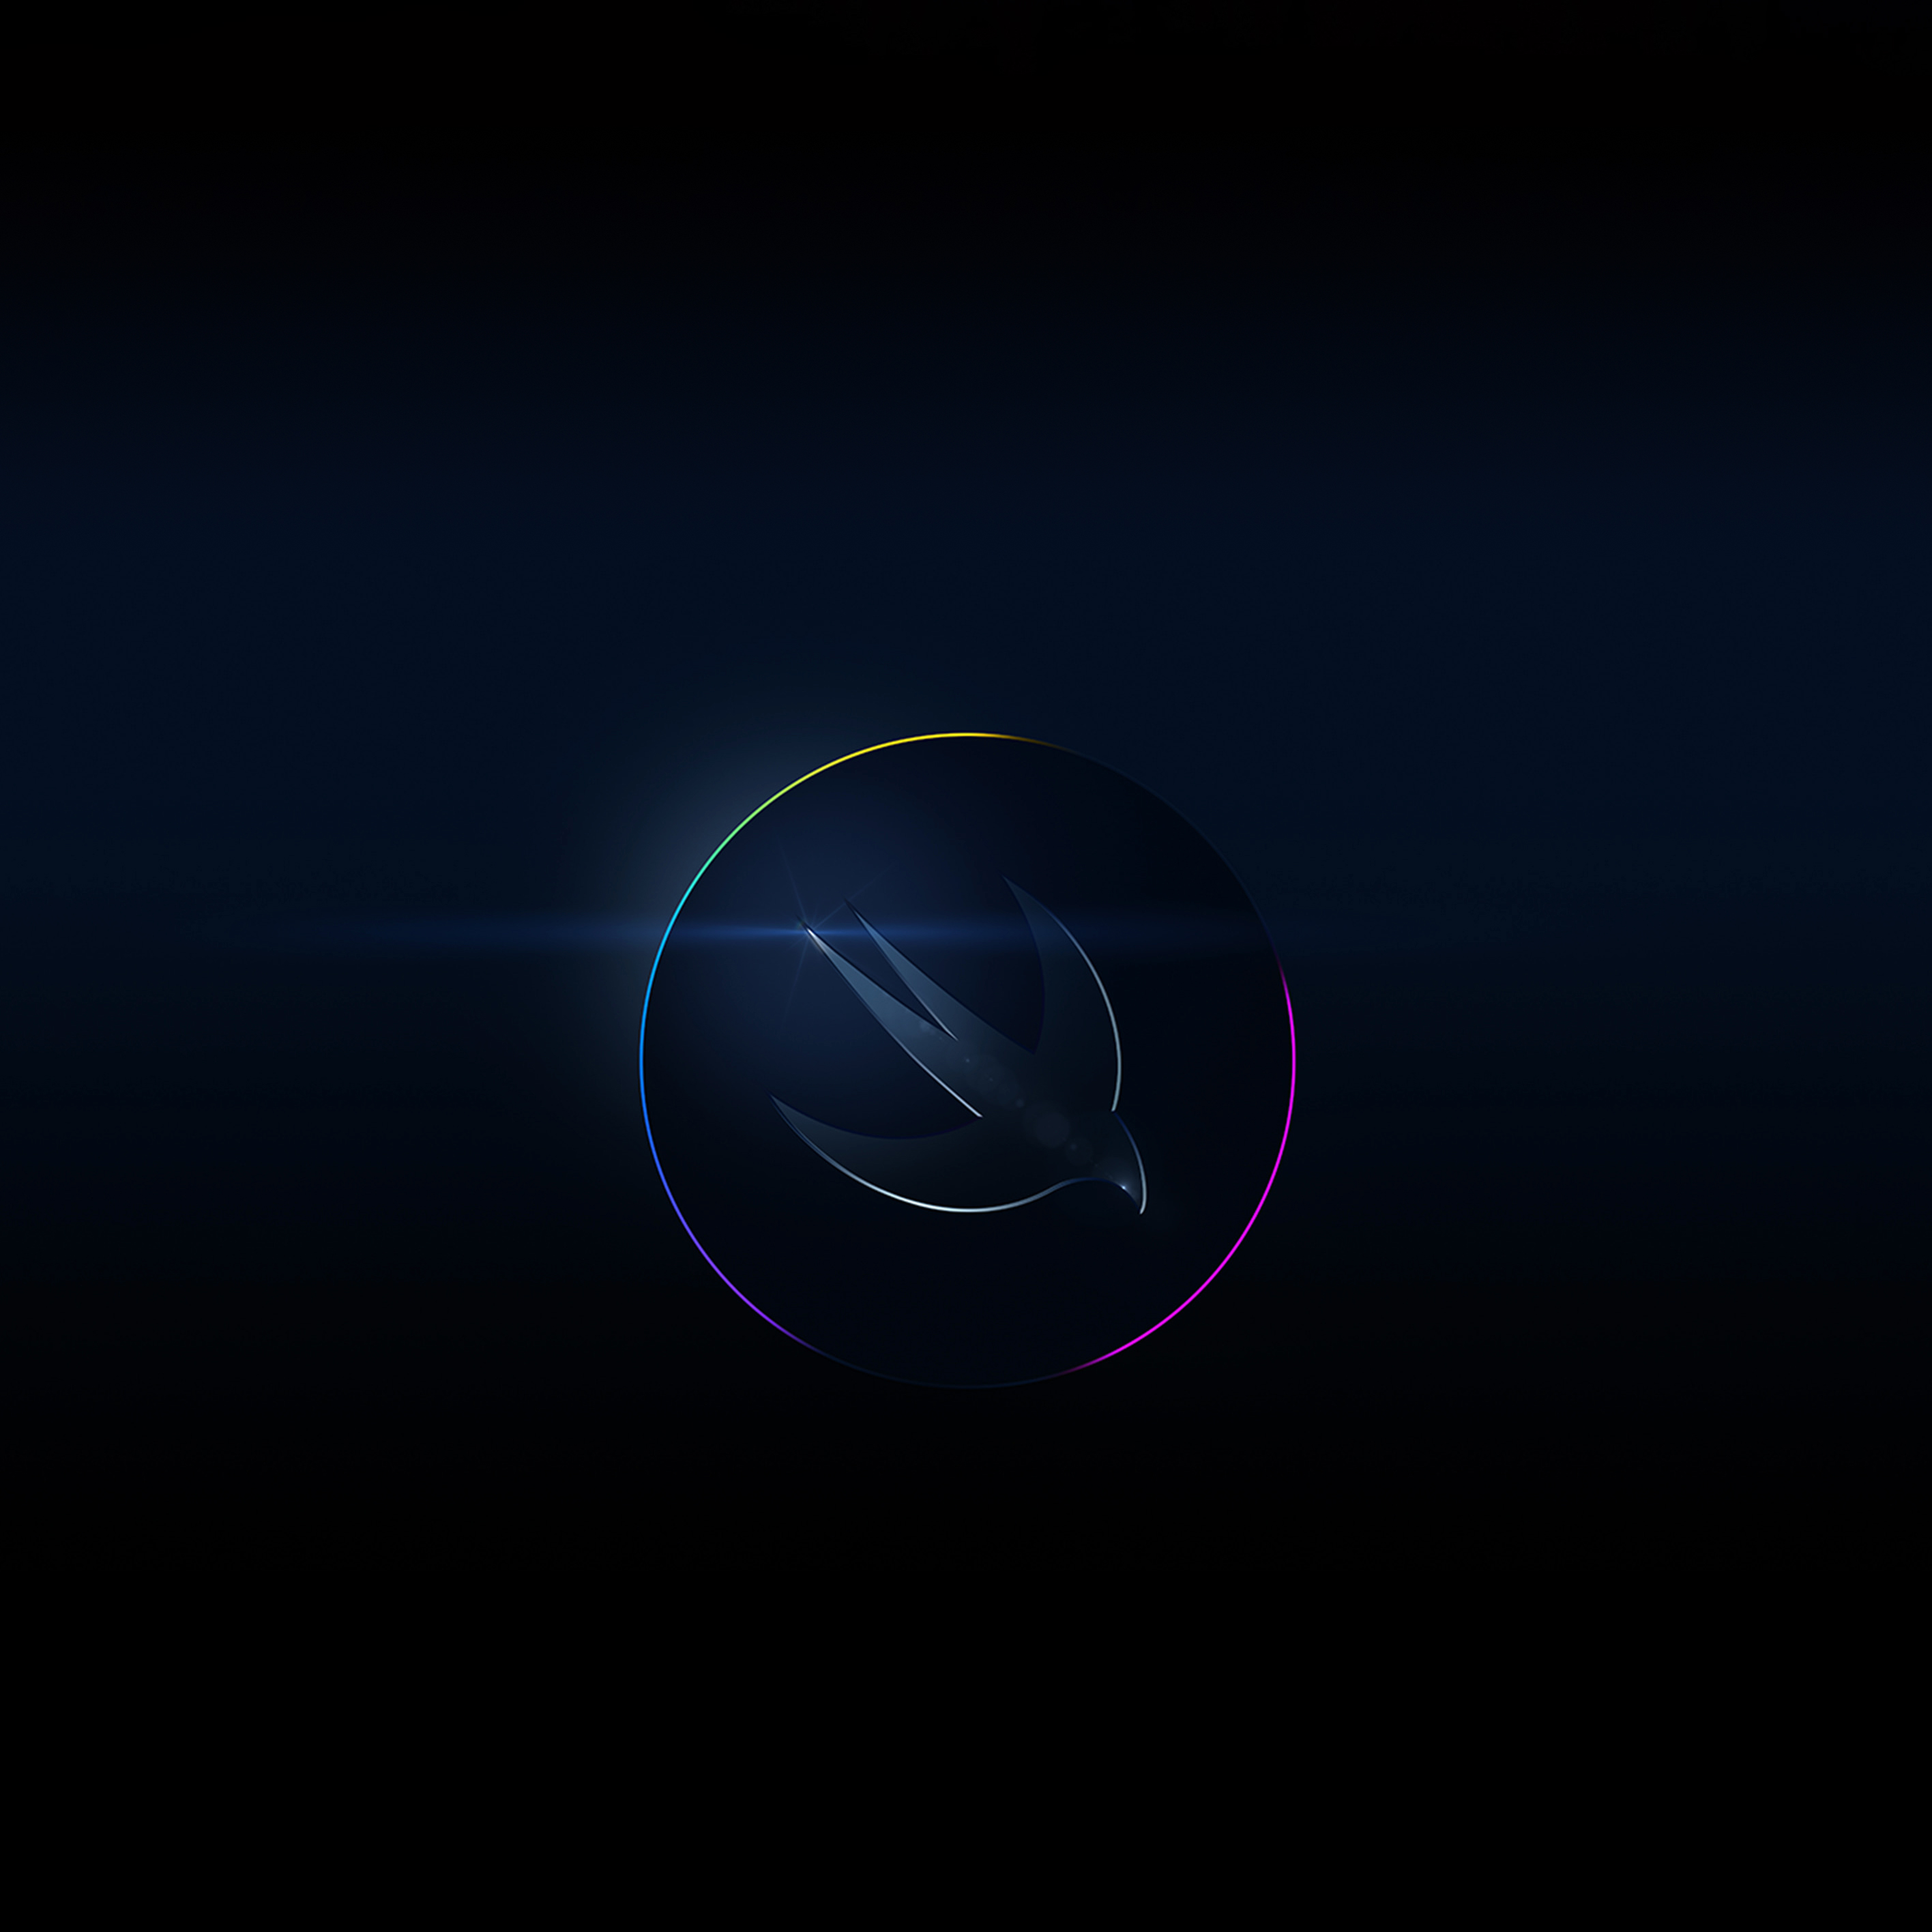 Apple WWDC 2022 Wallpaper - Wallpapers Central